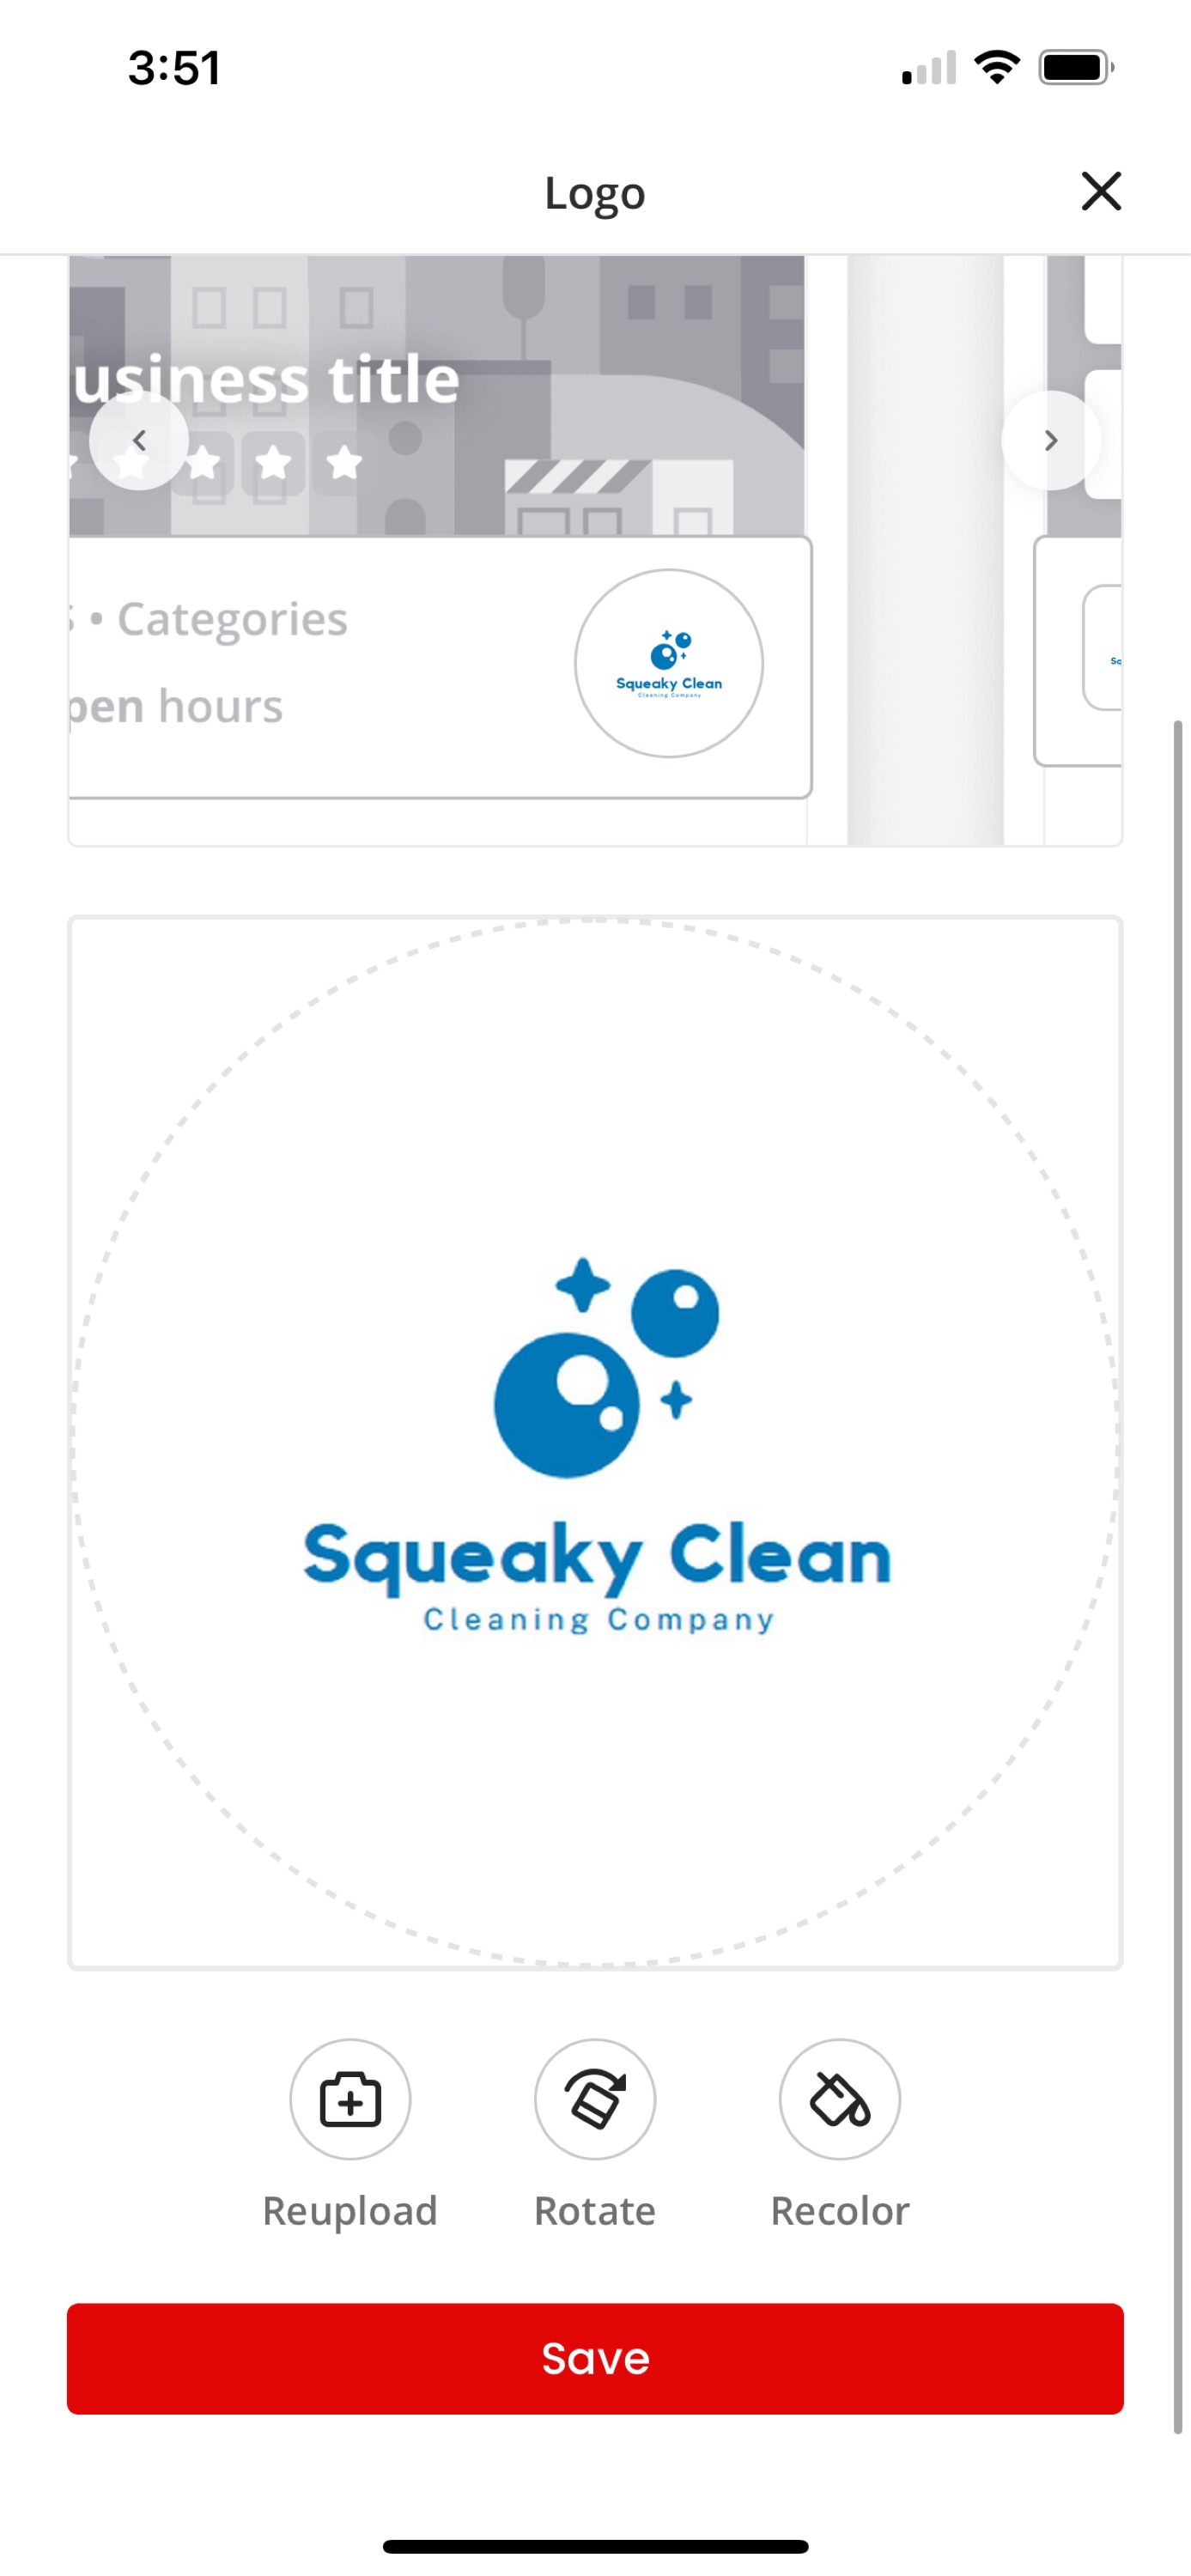 Squeaky Cleans Cleaning Company Logo